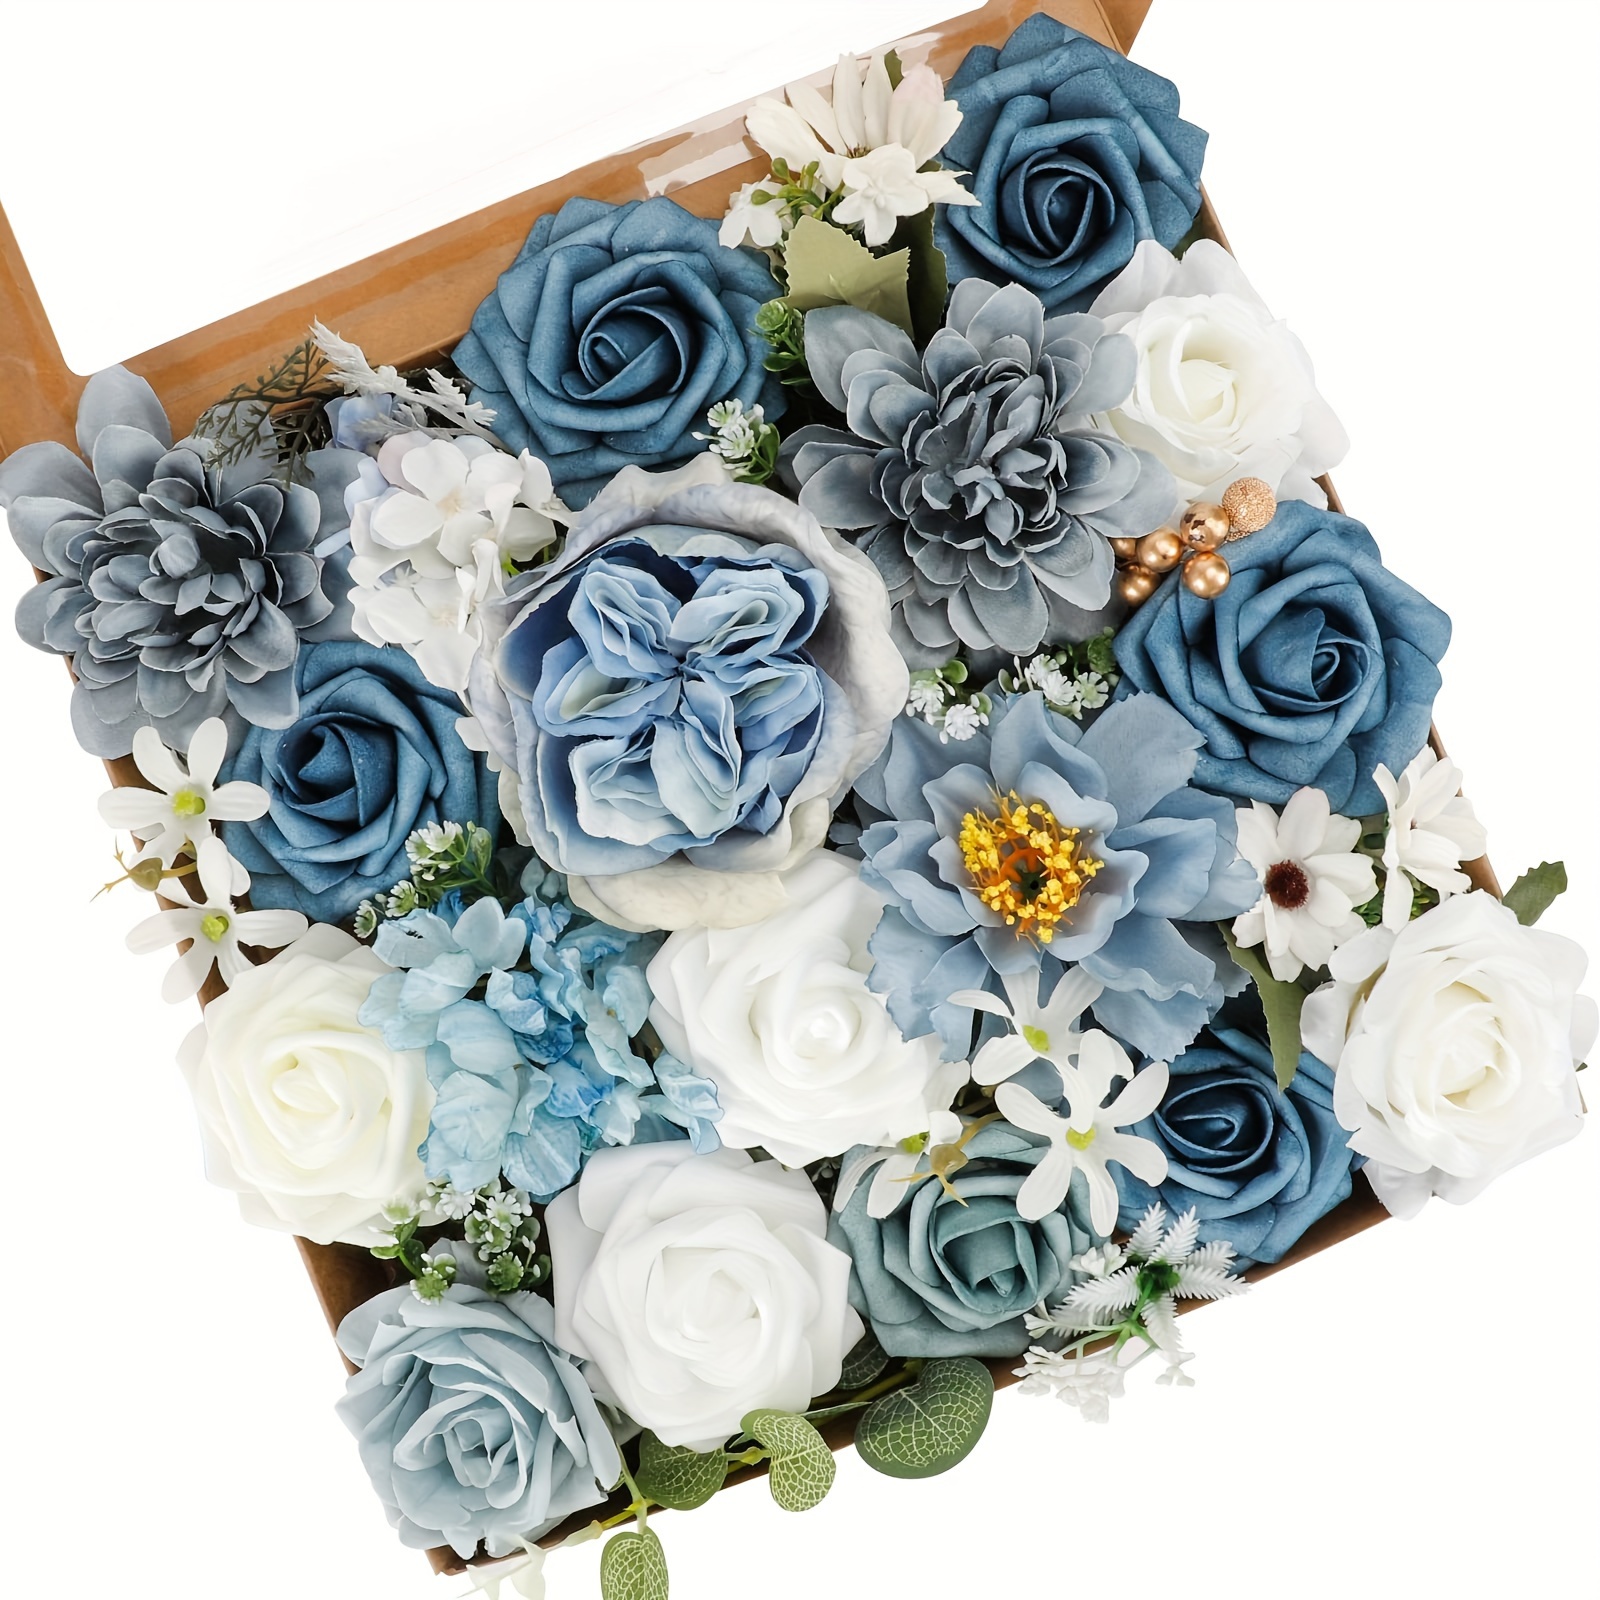 

1 Set Blue White Theme Artificial Flower Box, With 5pcs Cable Ties And 15pcs Stems, Dusty Blue Flowers Artificial For Decoration, Assorted Fake White Roses In Bulk Silk Foam Flowers, 10x10in